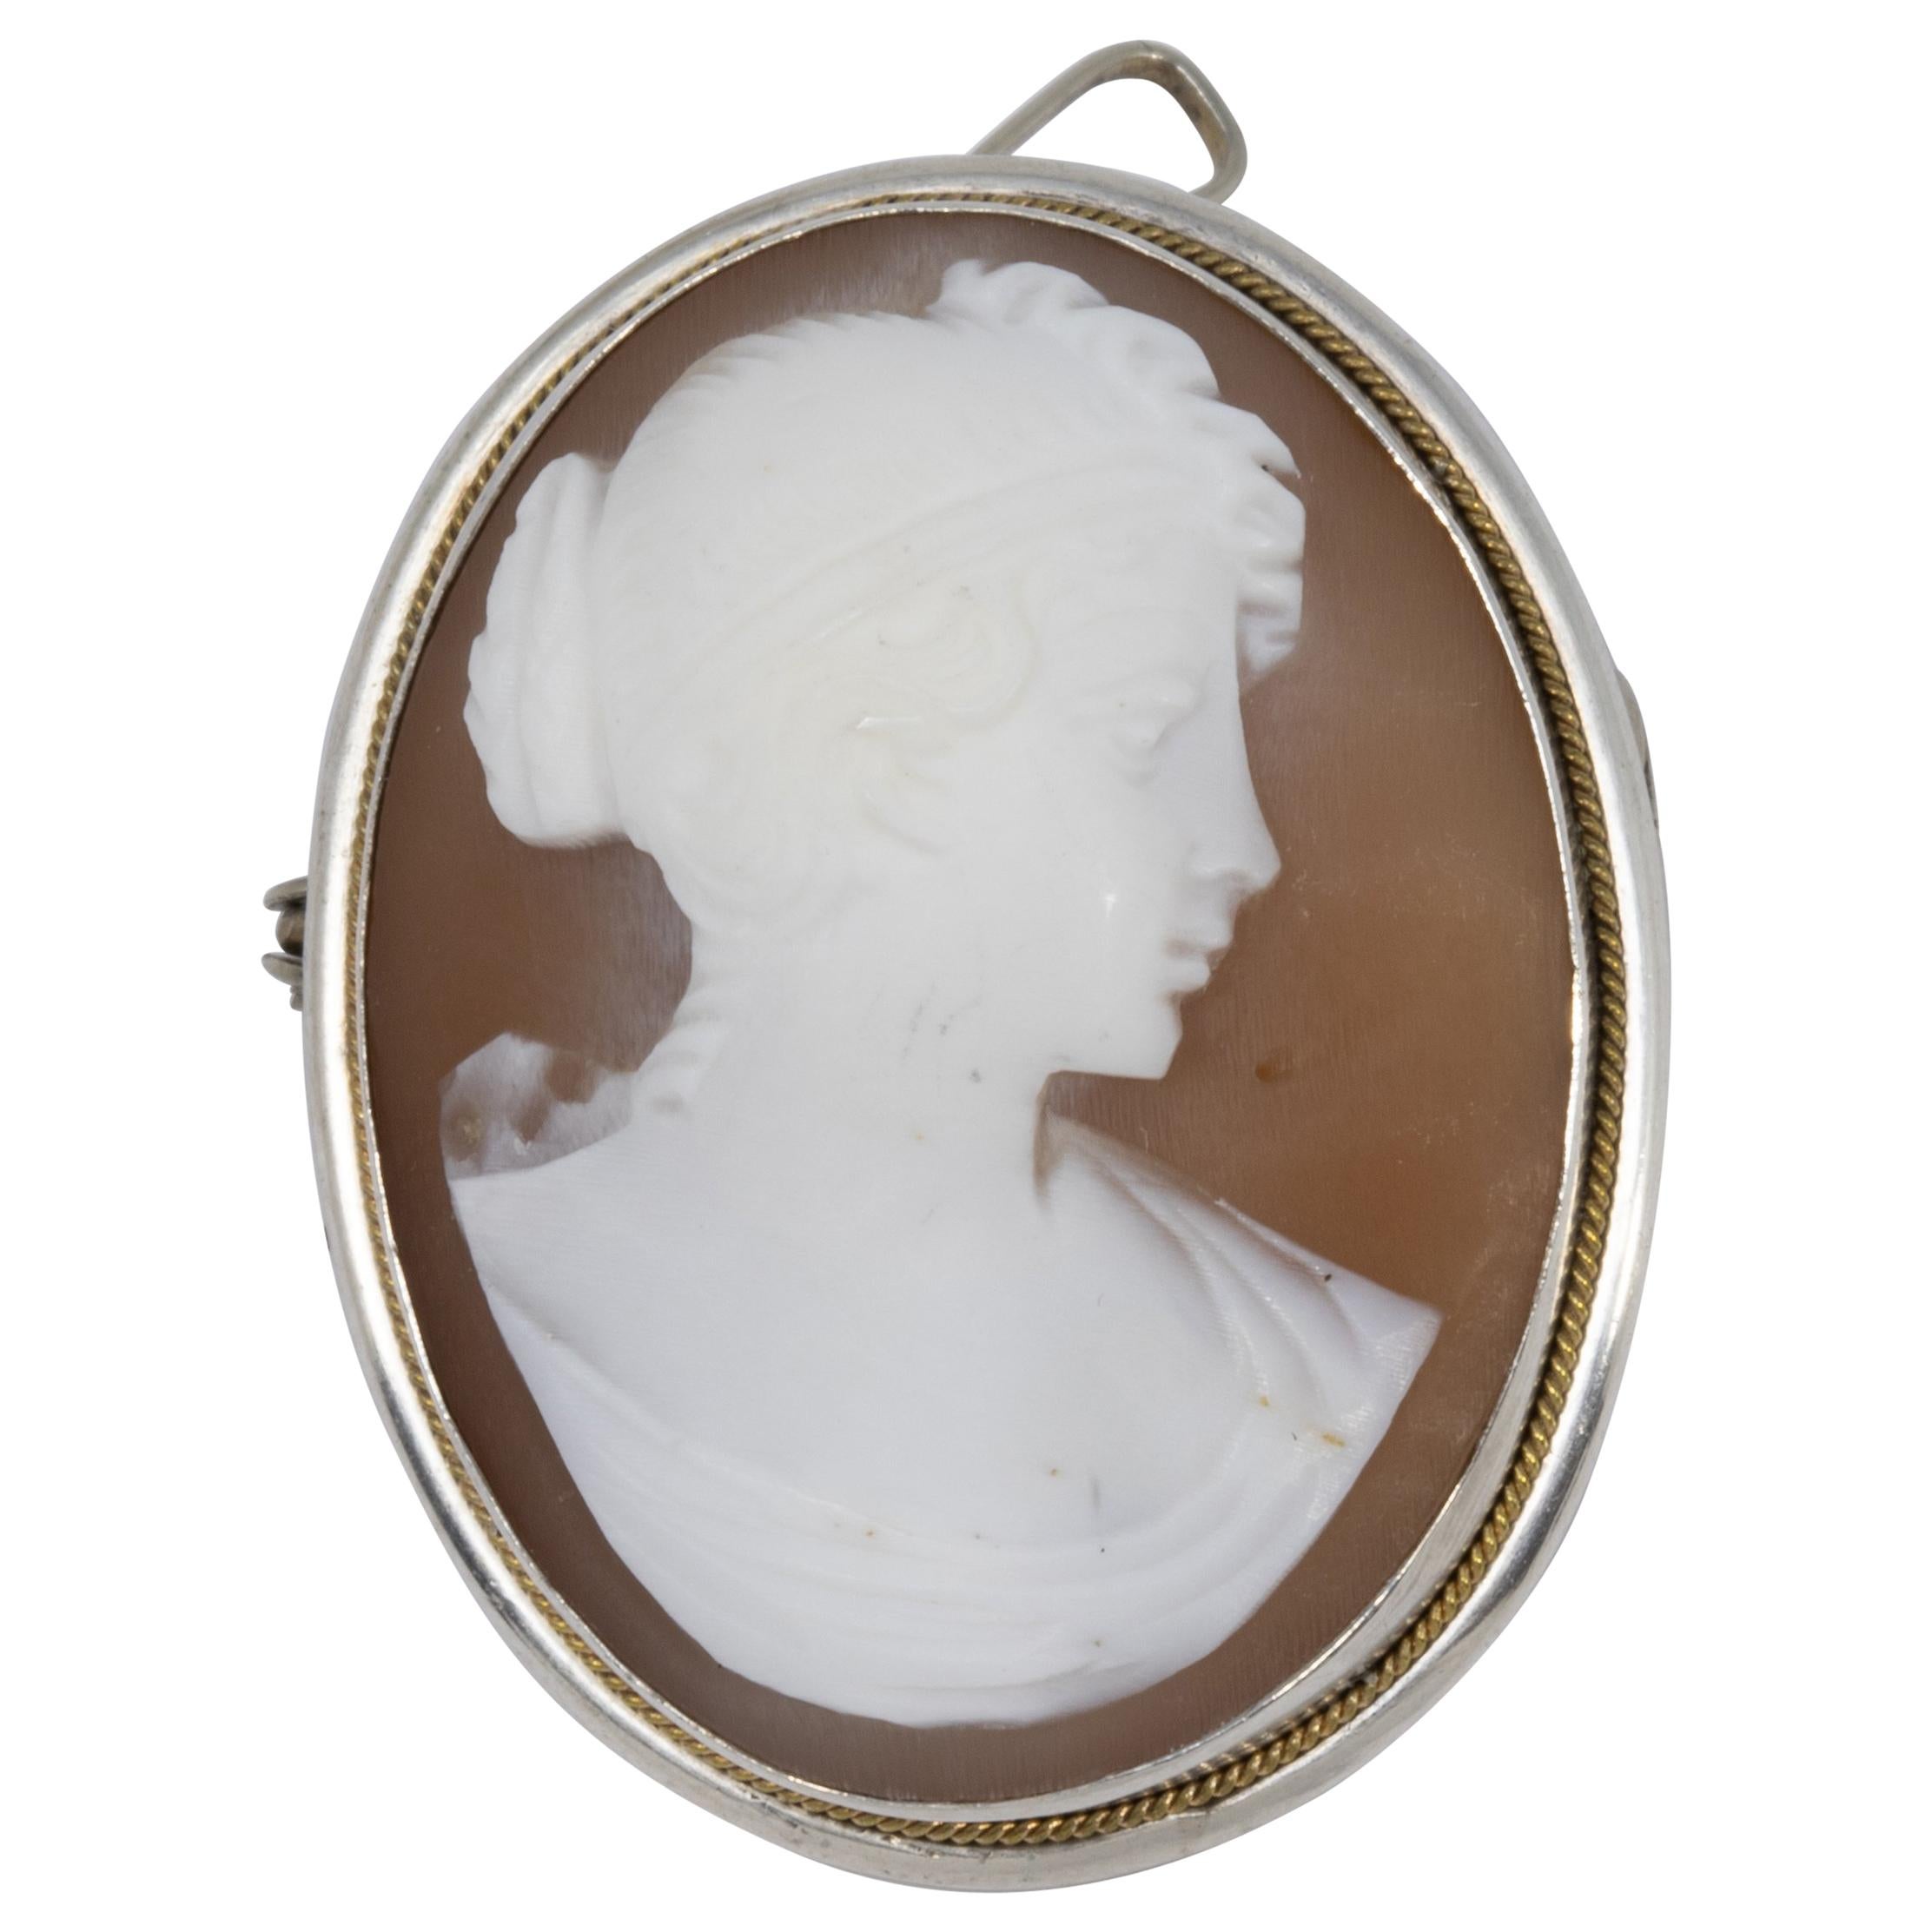 Antique Shell White and Cinnamon Cameo in Silver Bezel, Brooch Pin and Pendant